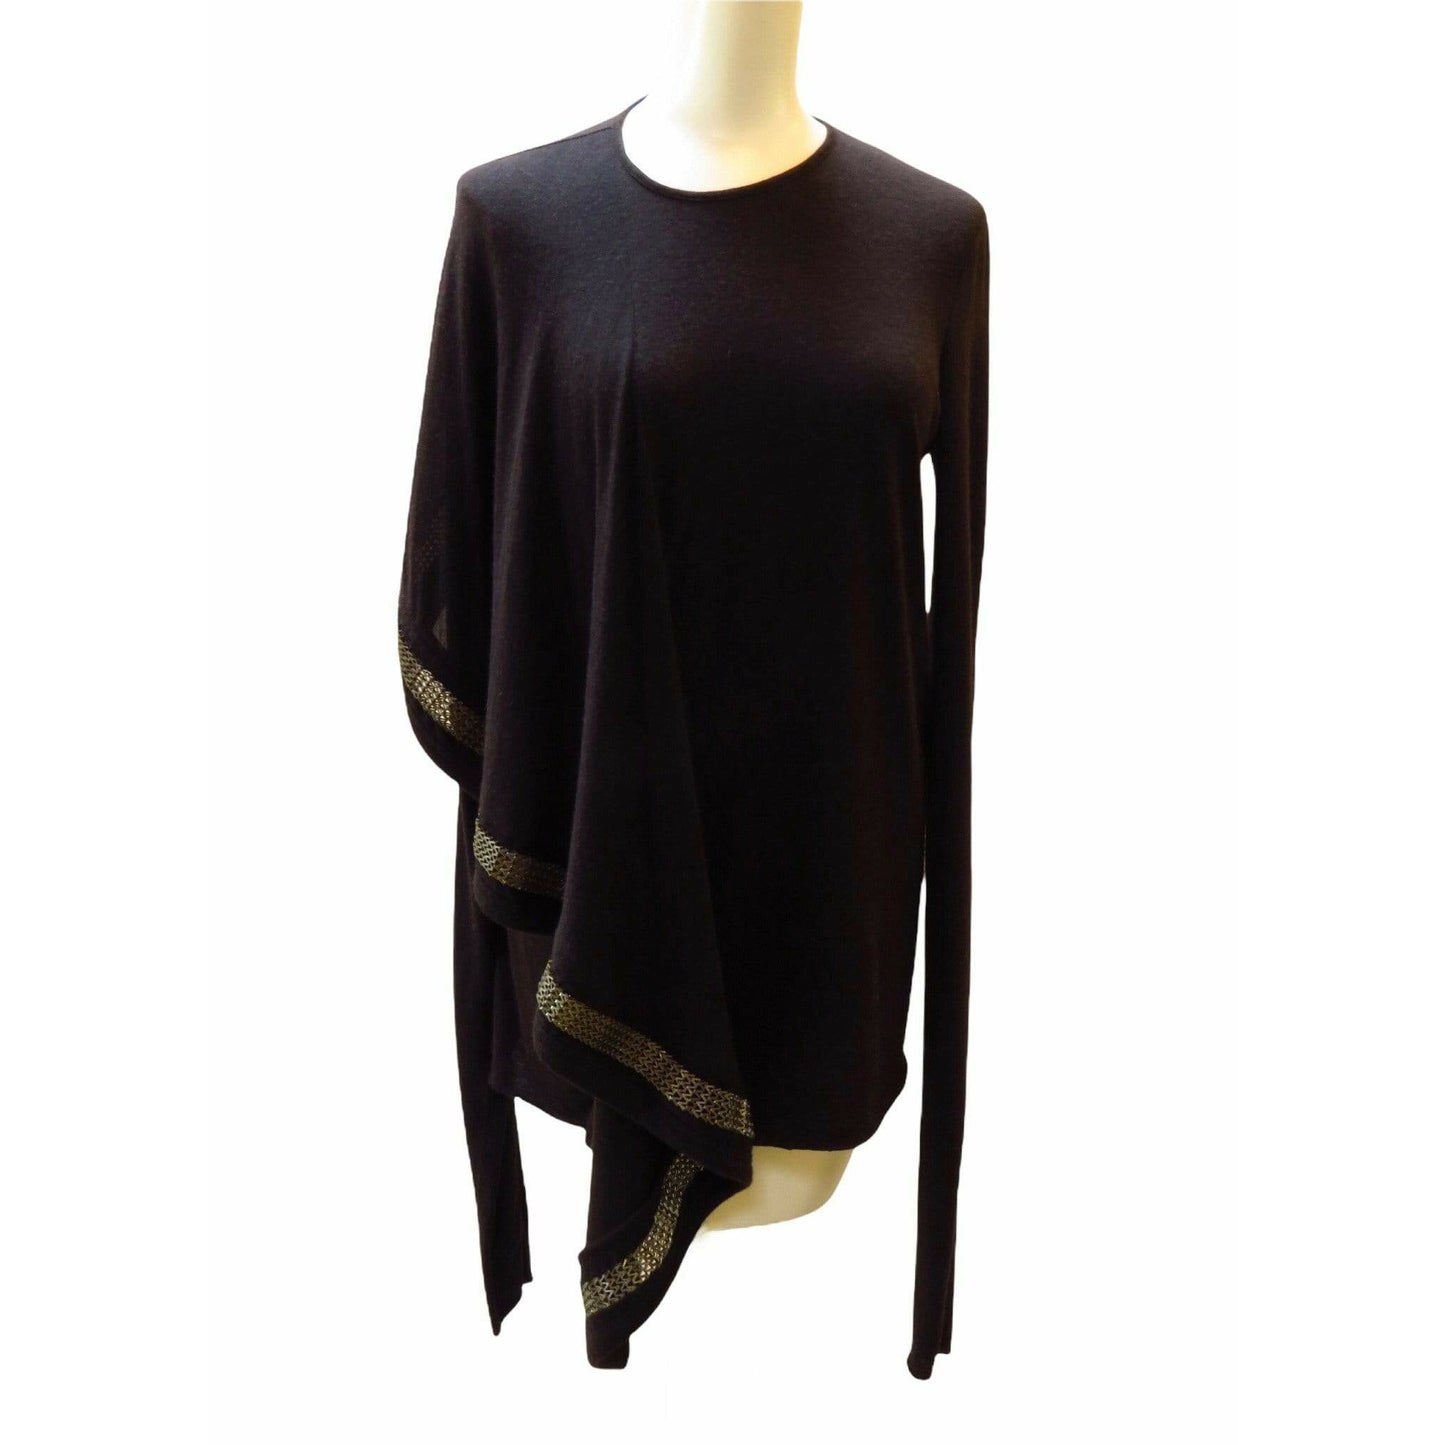 Shirts & Tops Rick Owens Lilies Knit Top with Chains Rick Owens